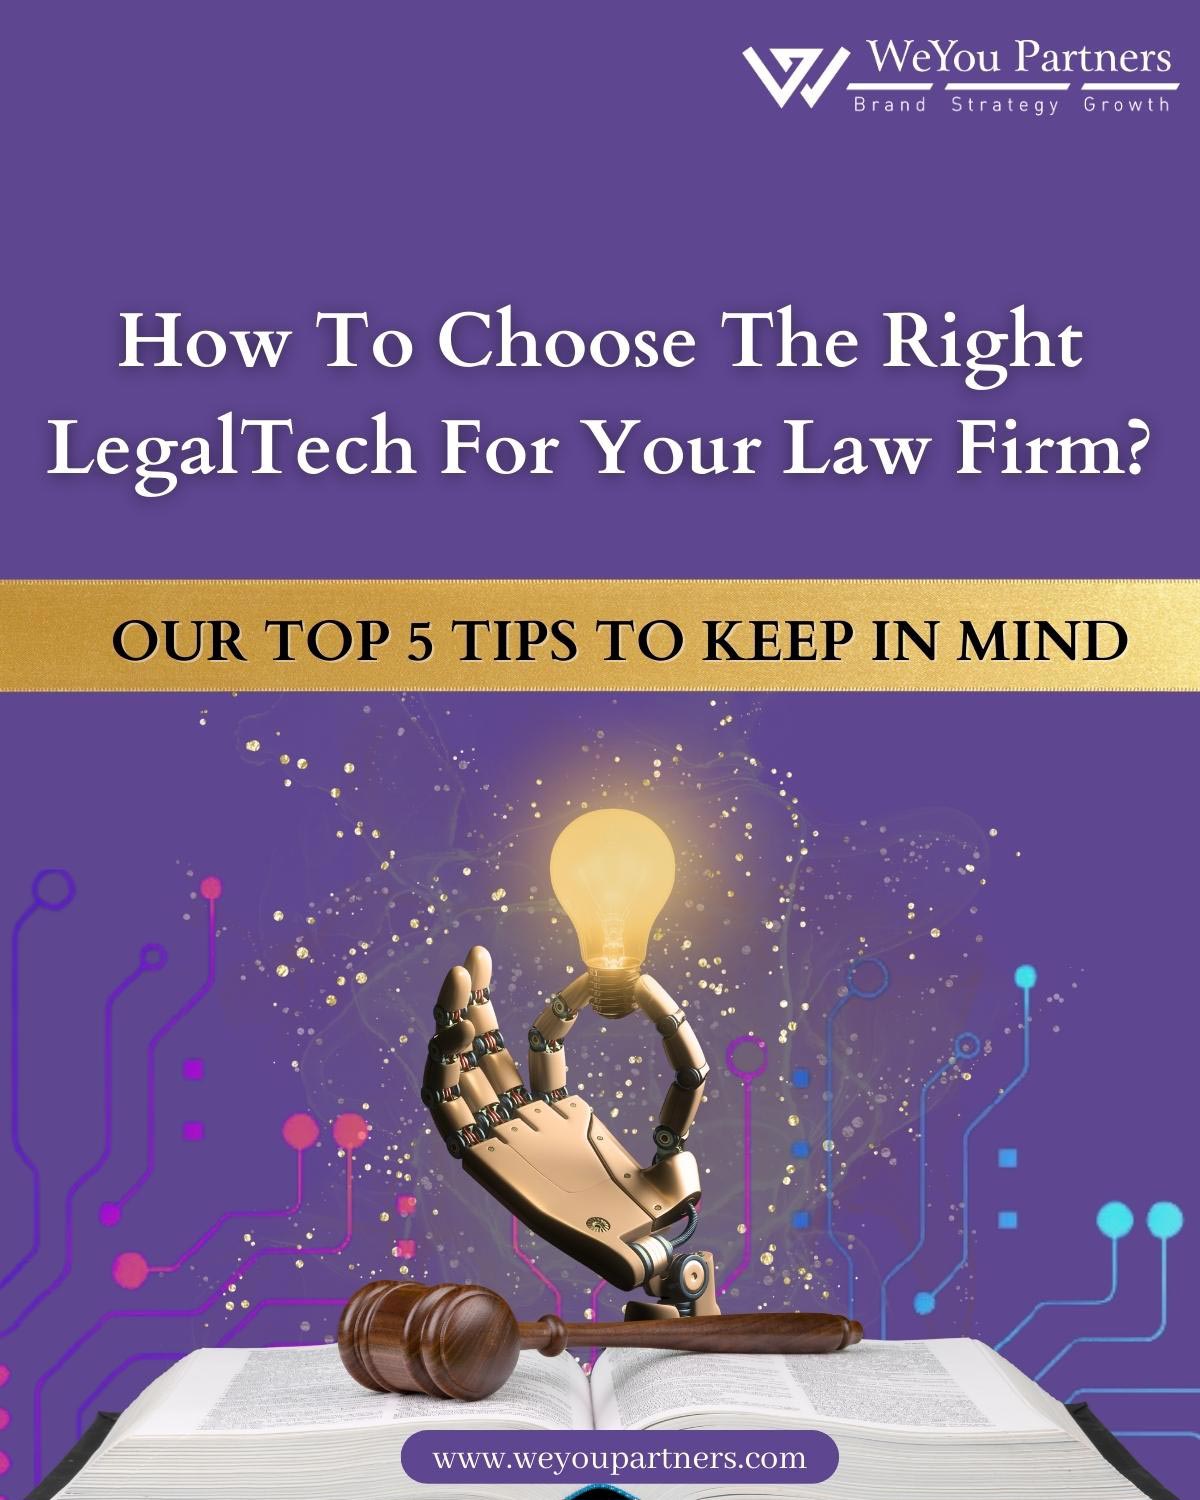 LegalTech For Law Firm